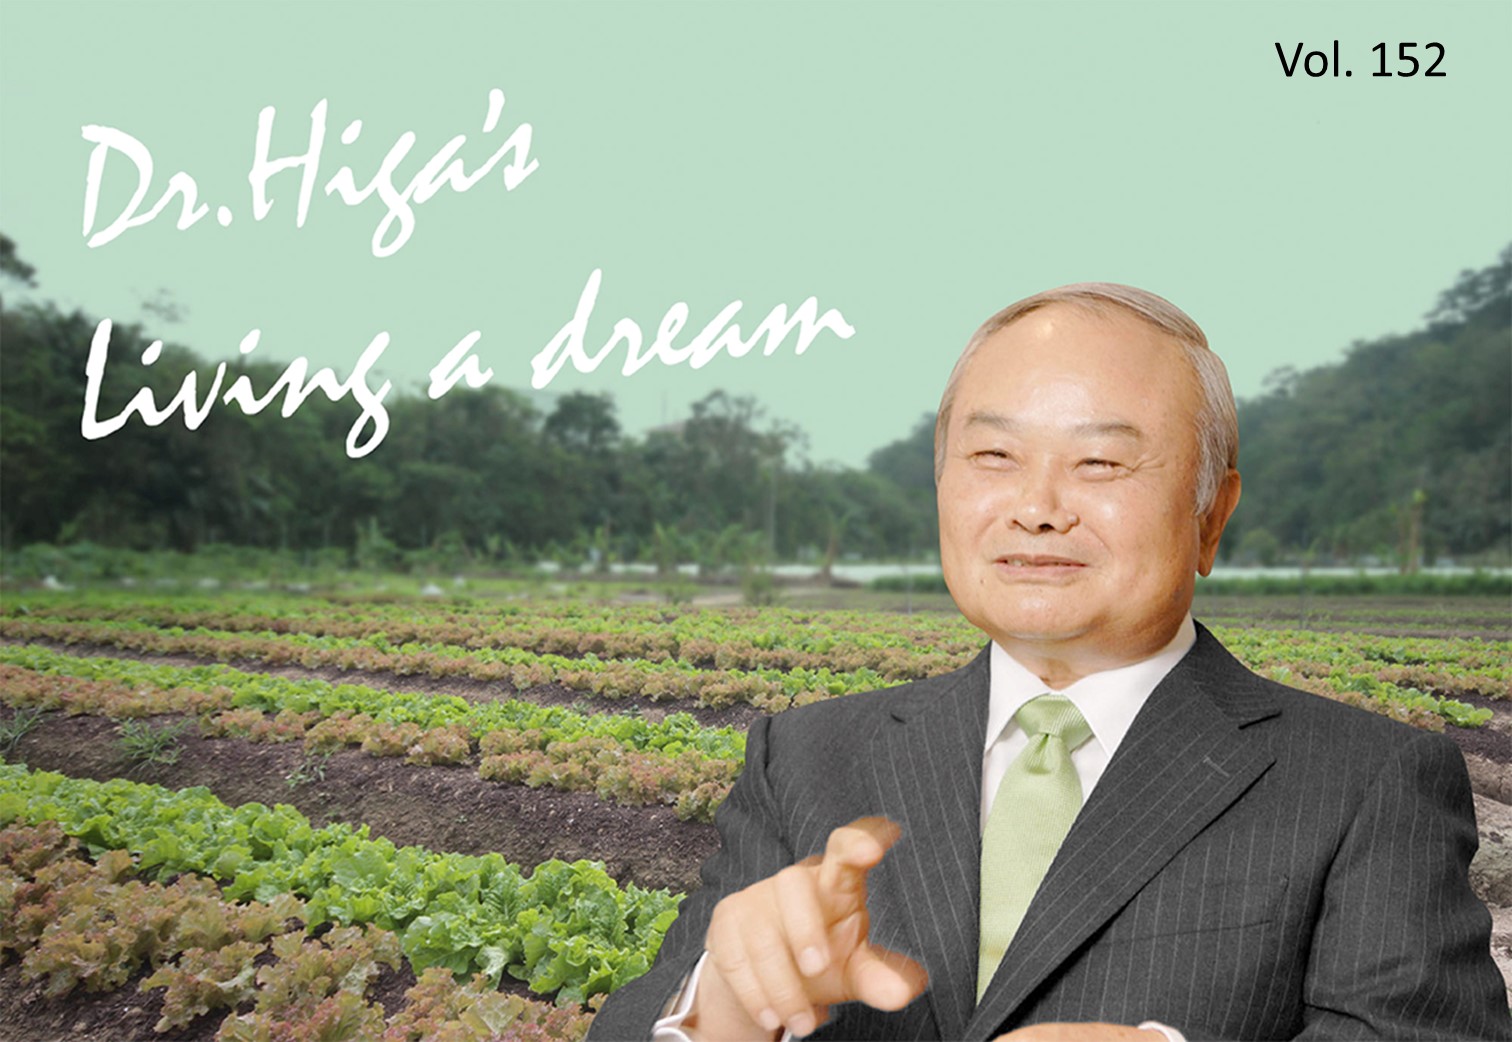 Dr. Higa's "Living a Dream": The latest article #152 is up!